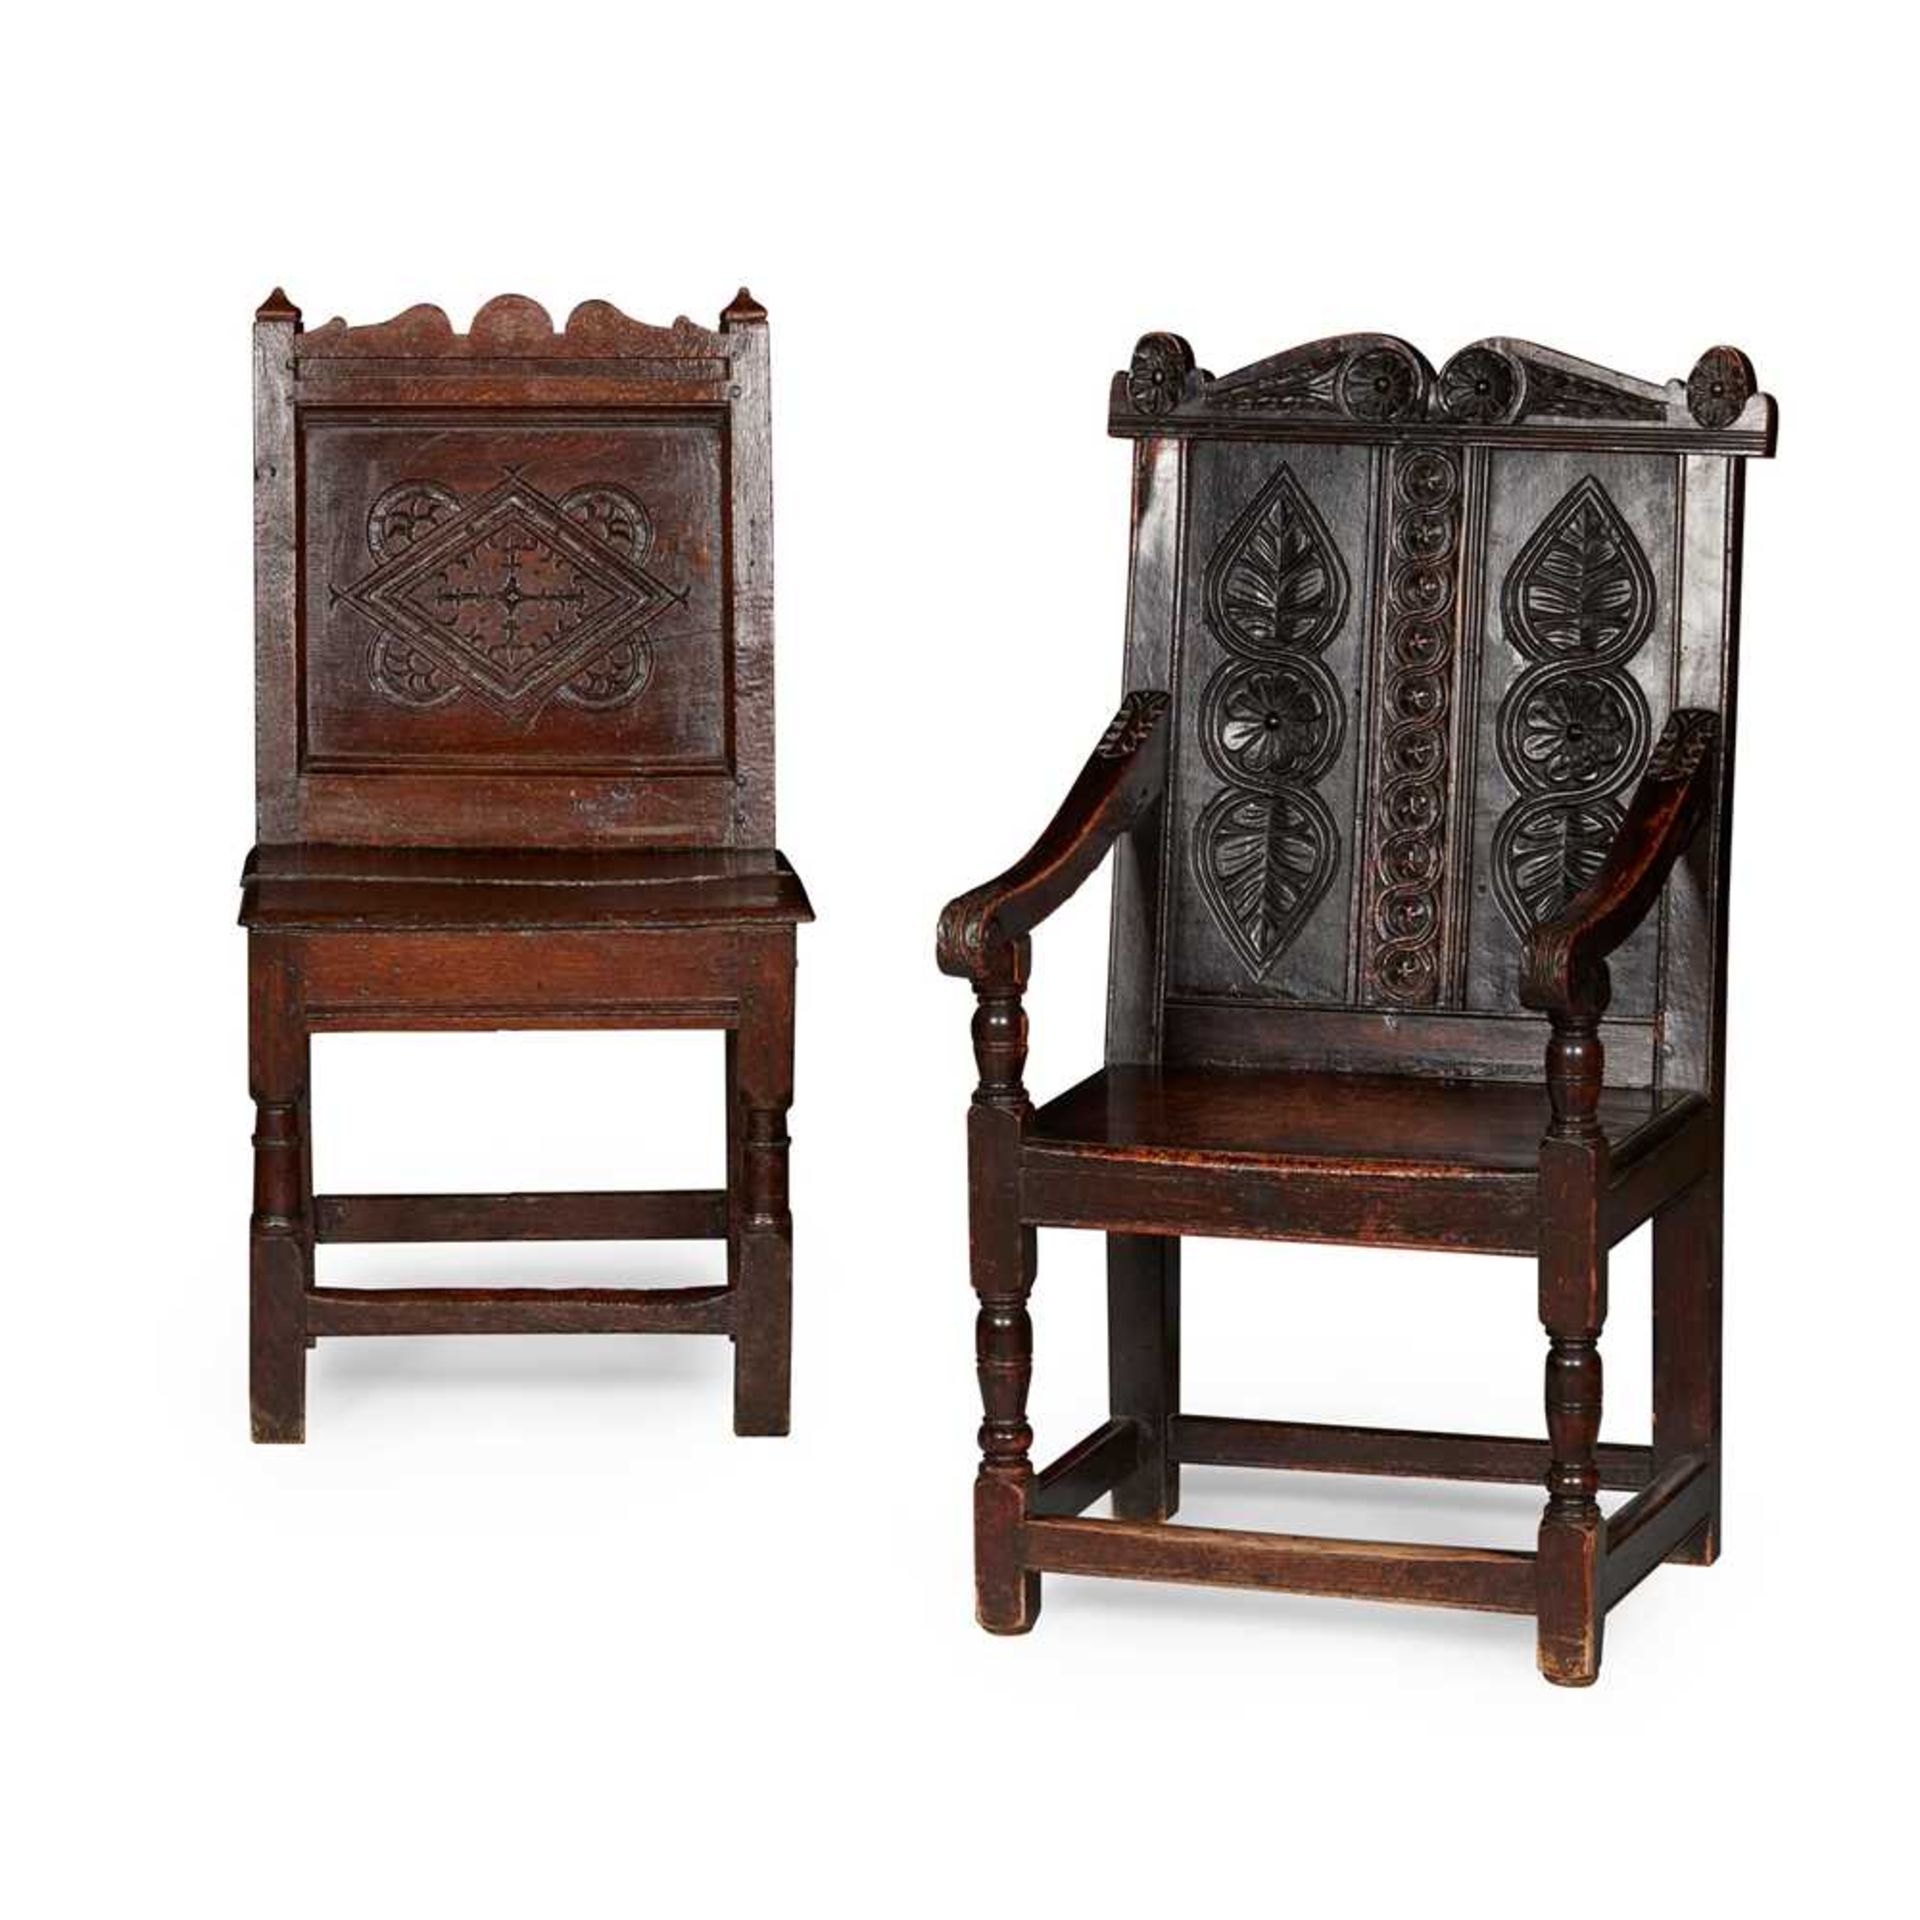 TWO EARLY OAK CHAIRS, YORKSHIRE 17TH CENTURY